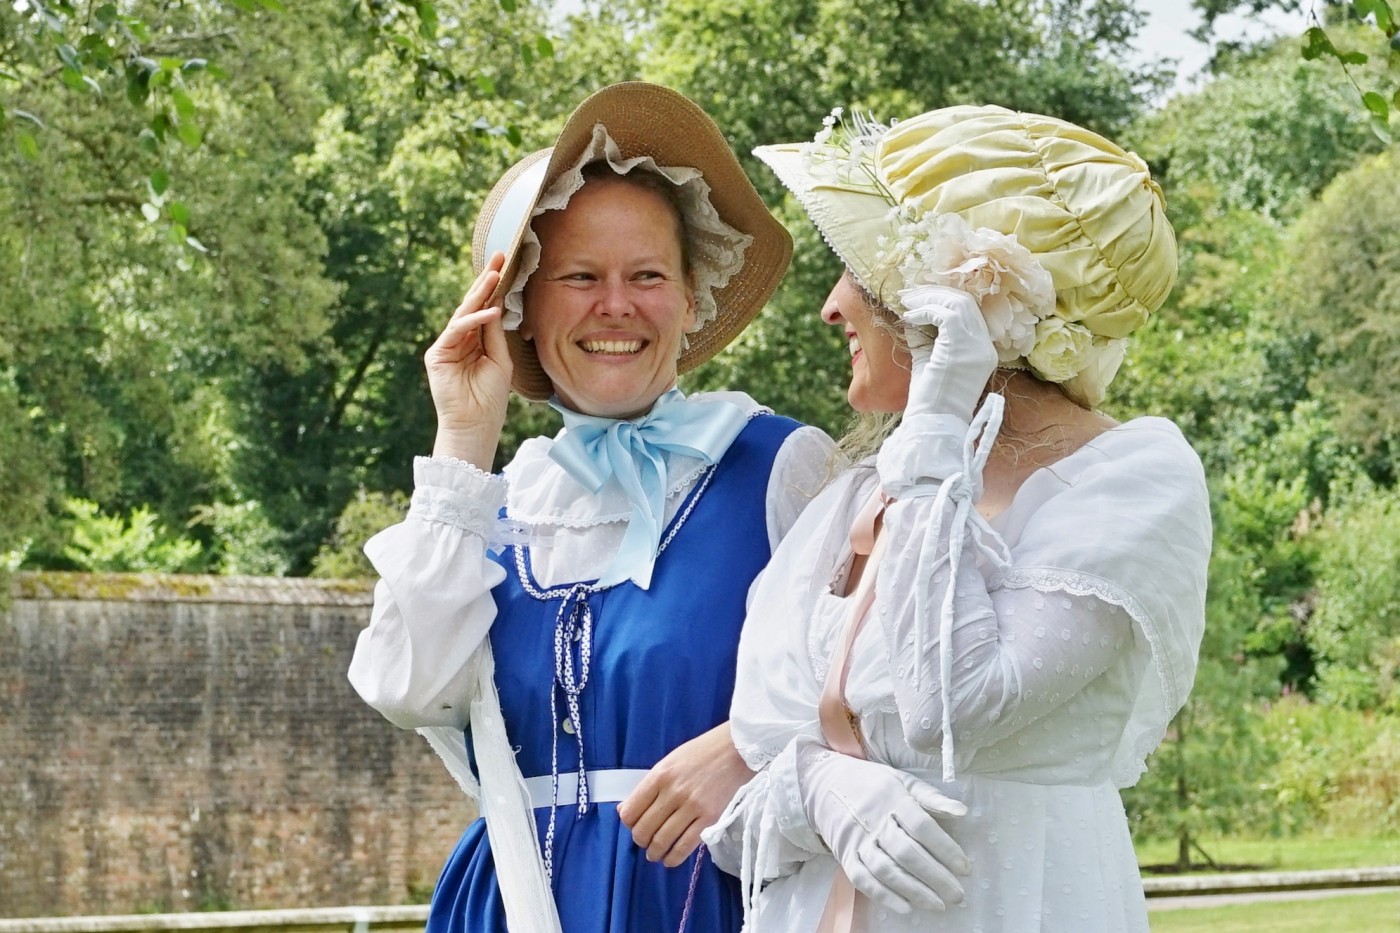 Image 5. Alice and Jayne – hanging onto their bonnets in the wind!